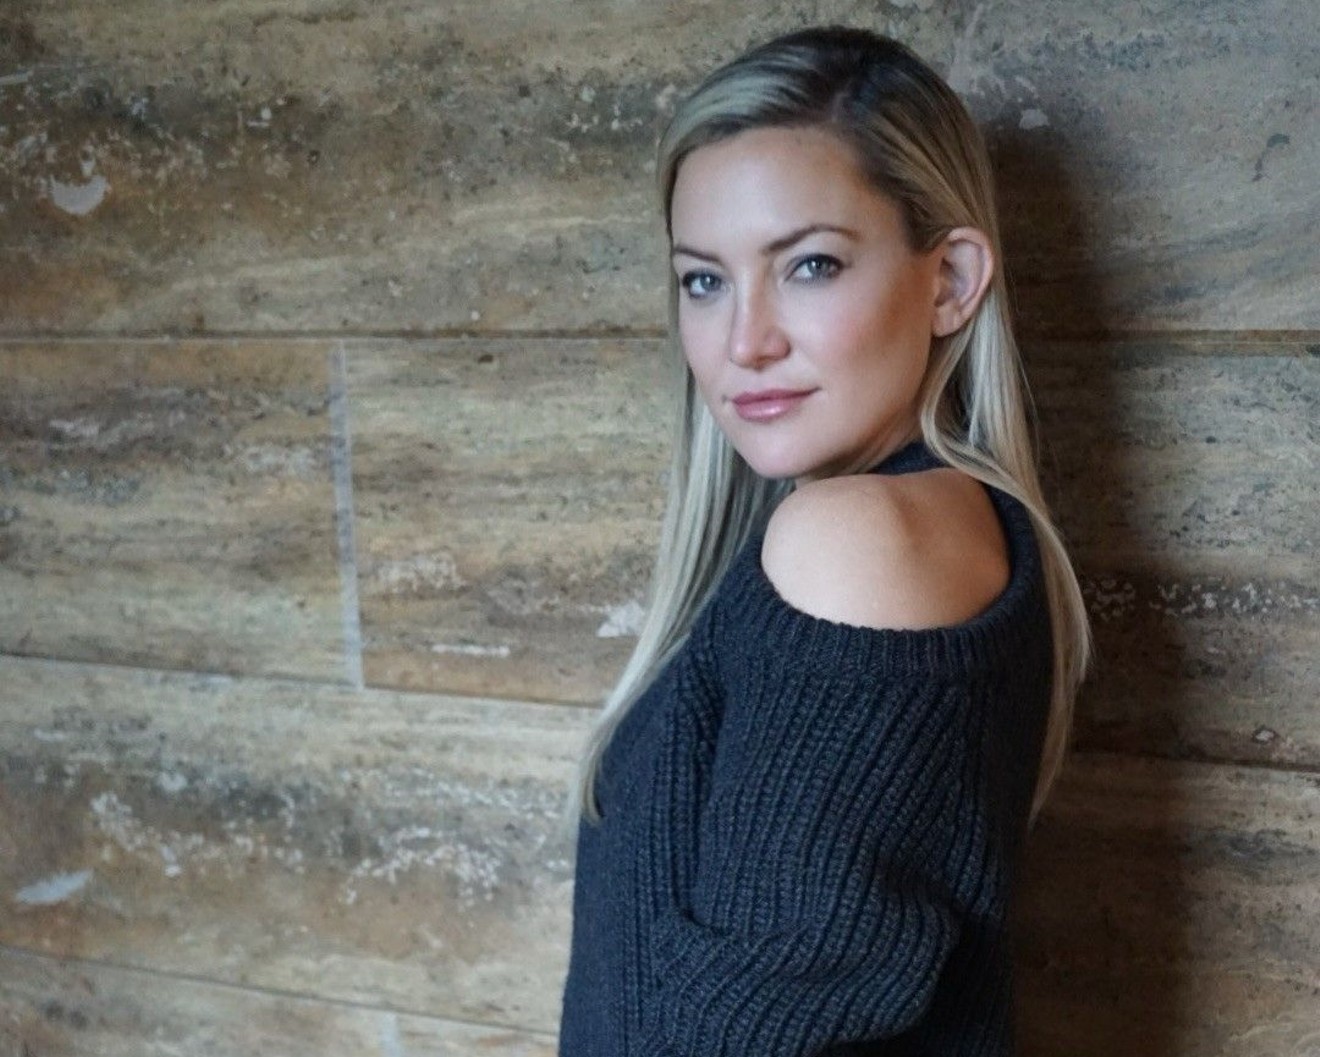 Kate Hudson will be pouring her own vodka brand at SOBEWFF.